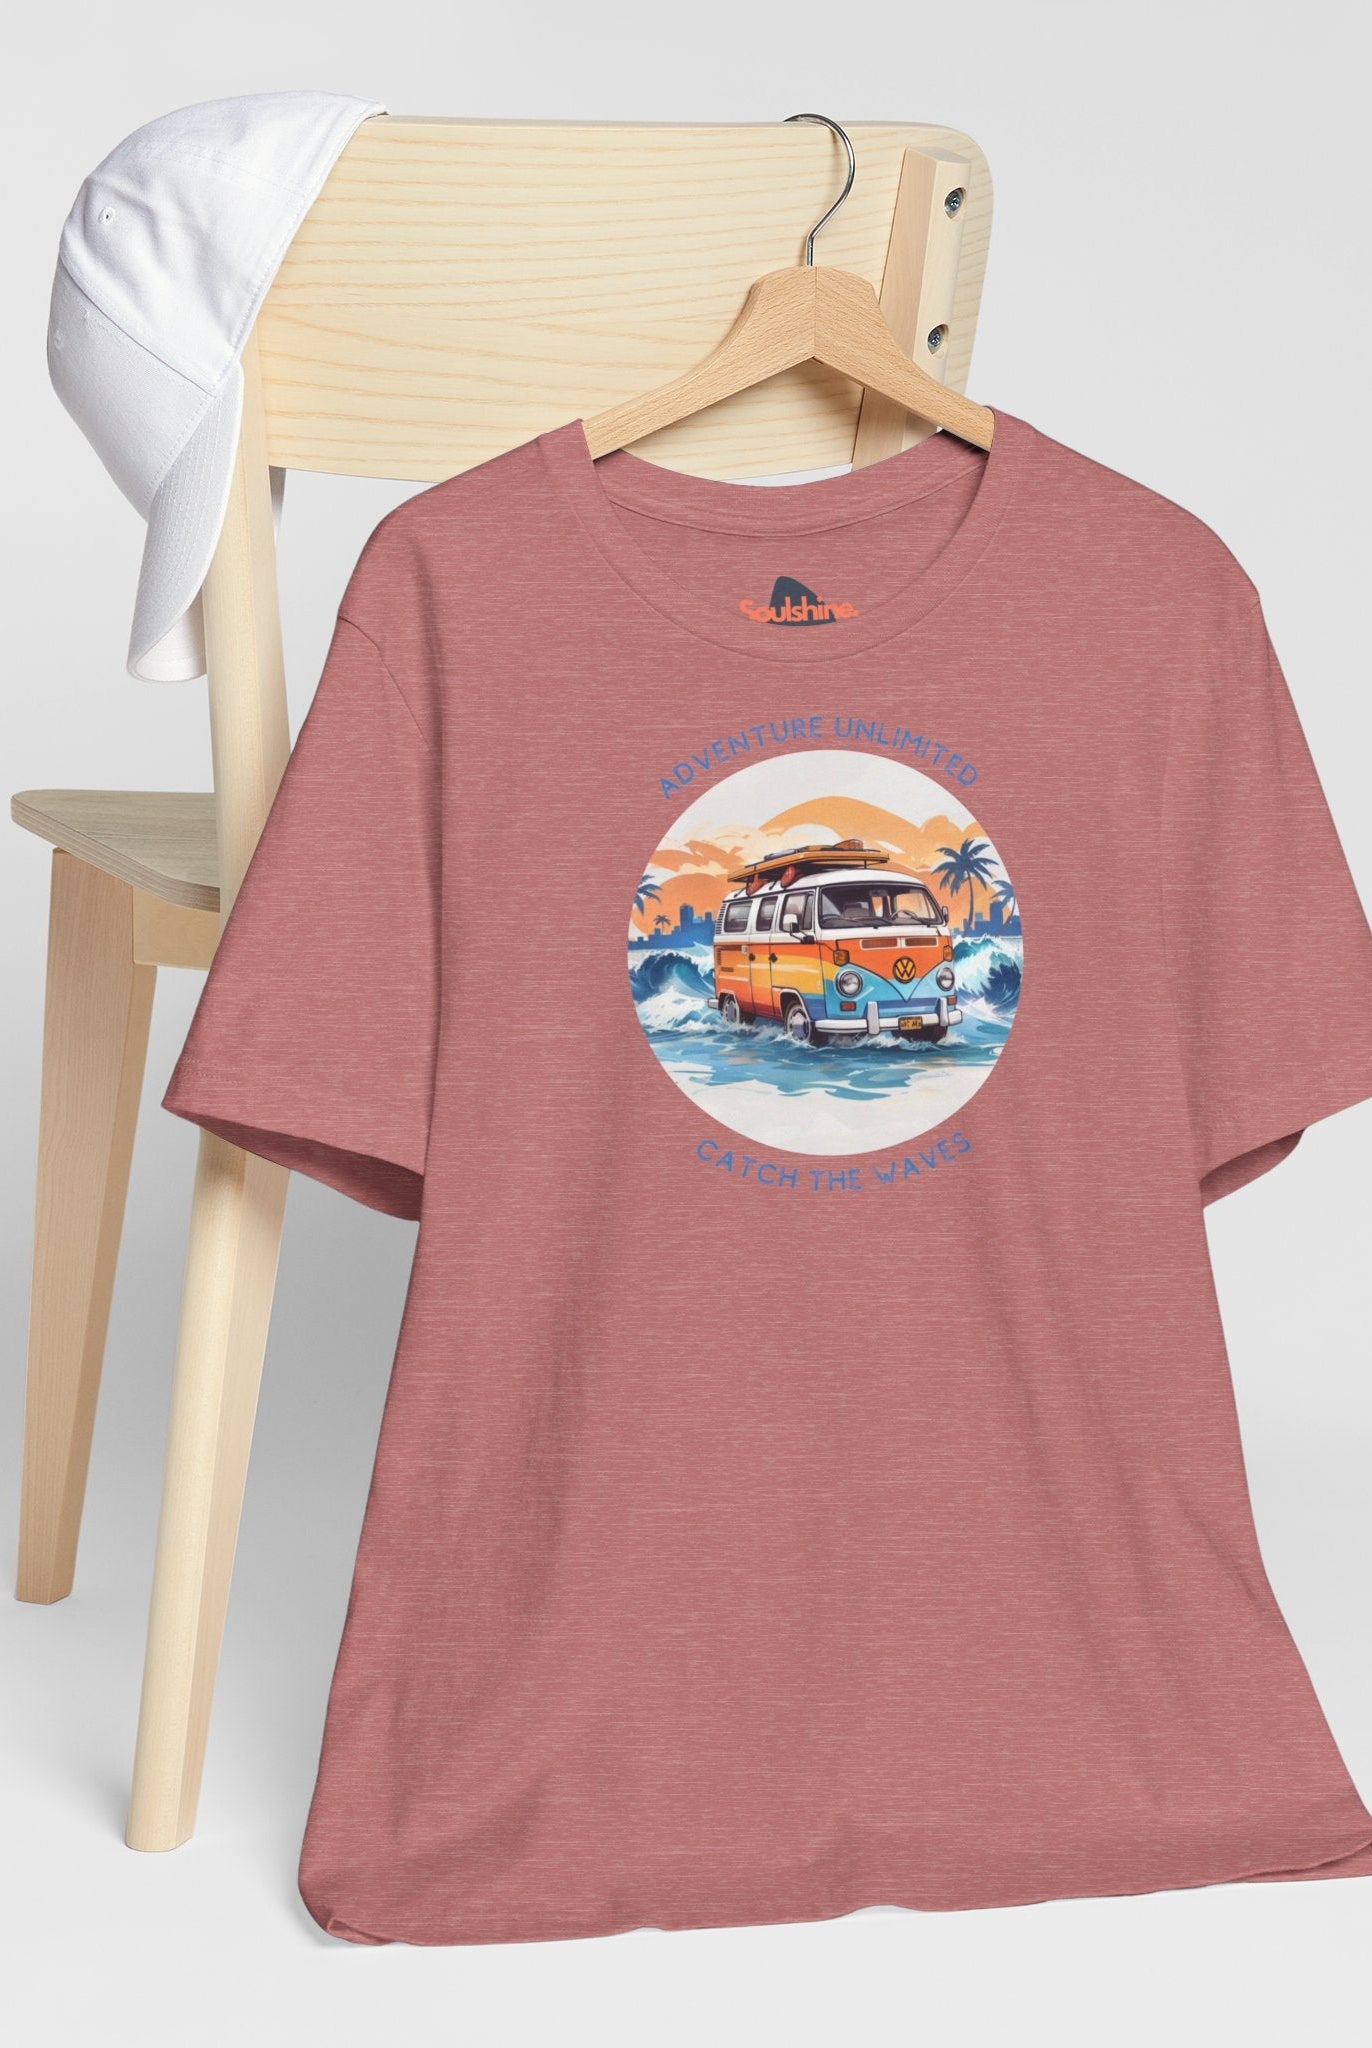 Red car graphic sunset printed on Adventure Unlimited Surfing T-Shirt - Bella & Canvas EU